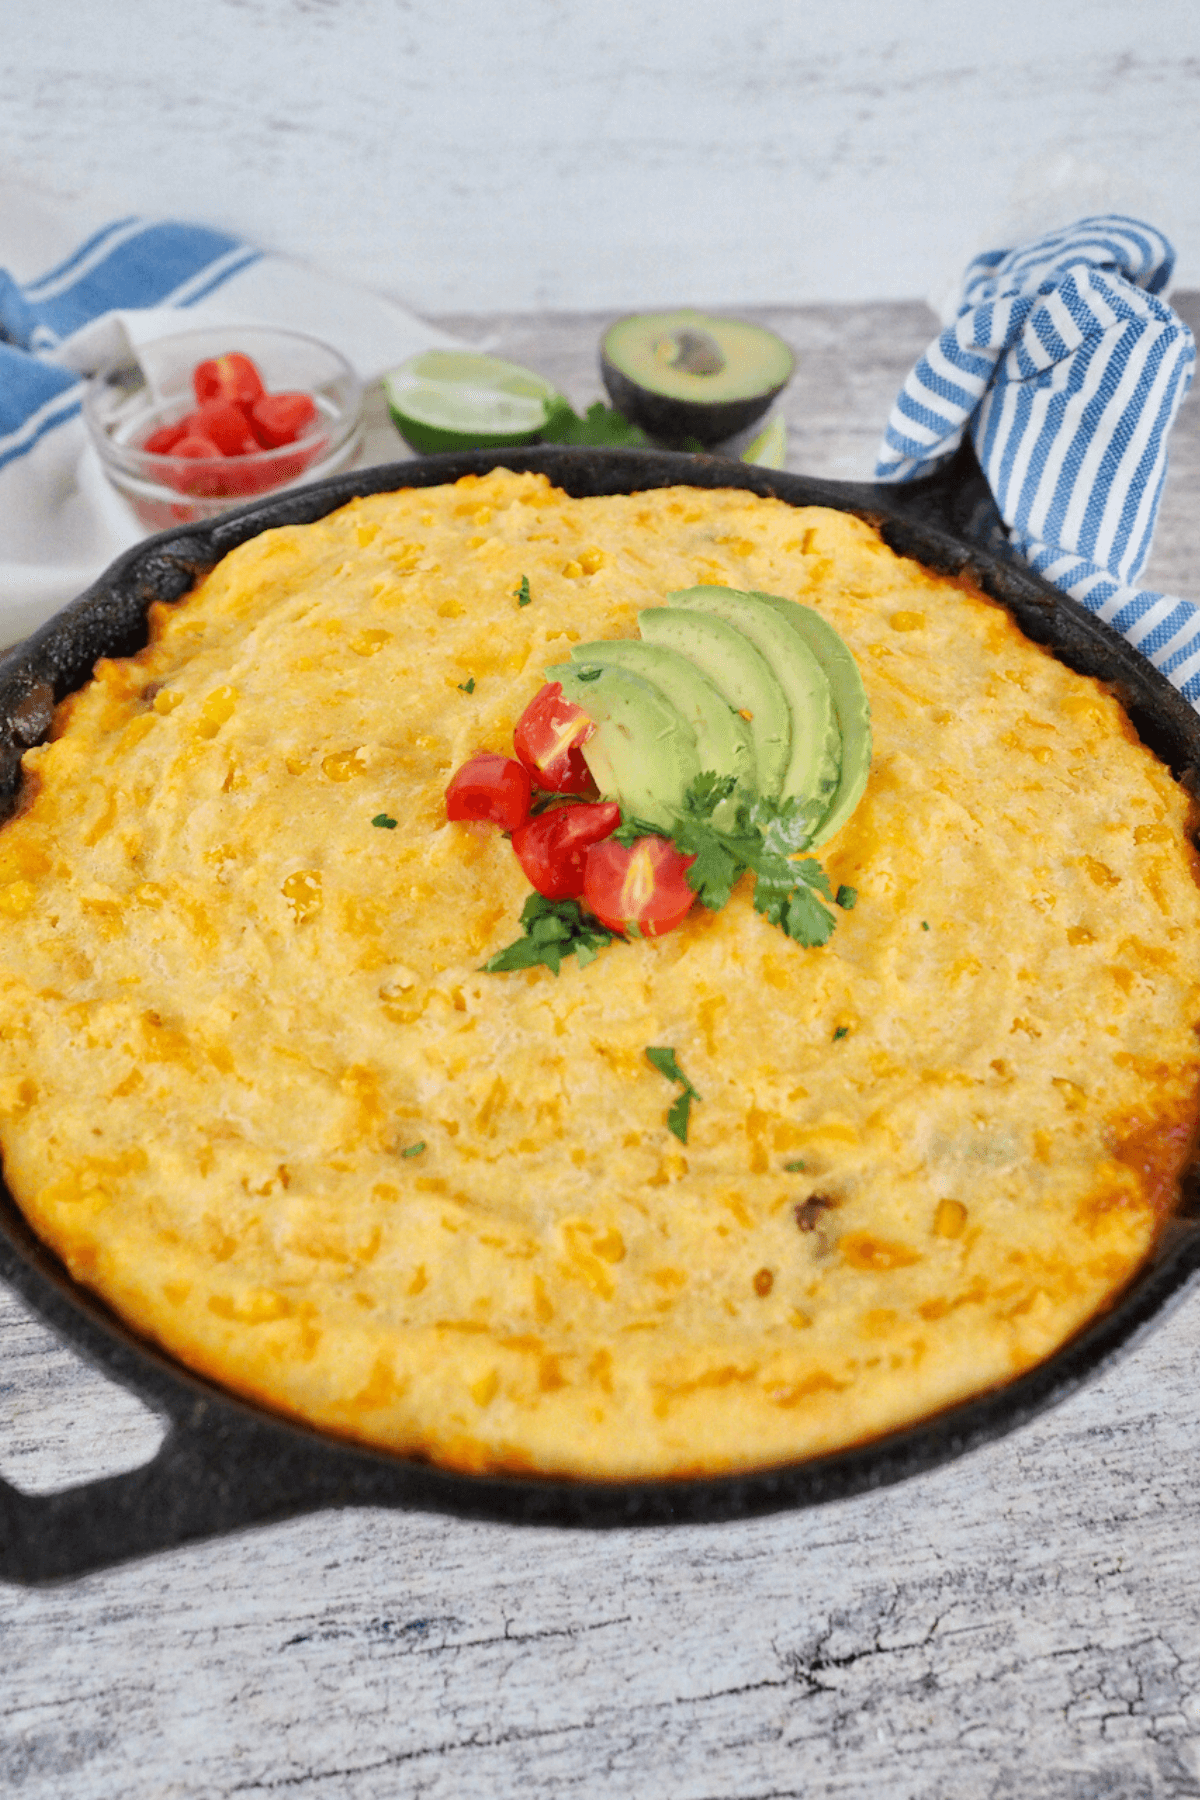 Tamale Pie recipe with cornmeal crust garnished with avocado and chopped tomatoes.